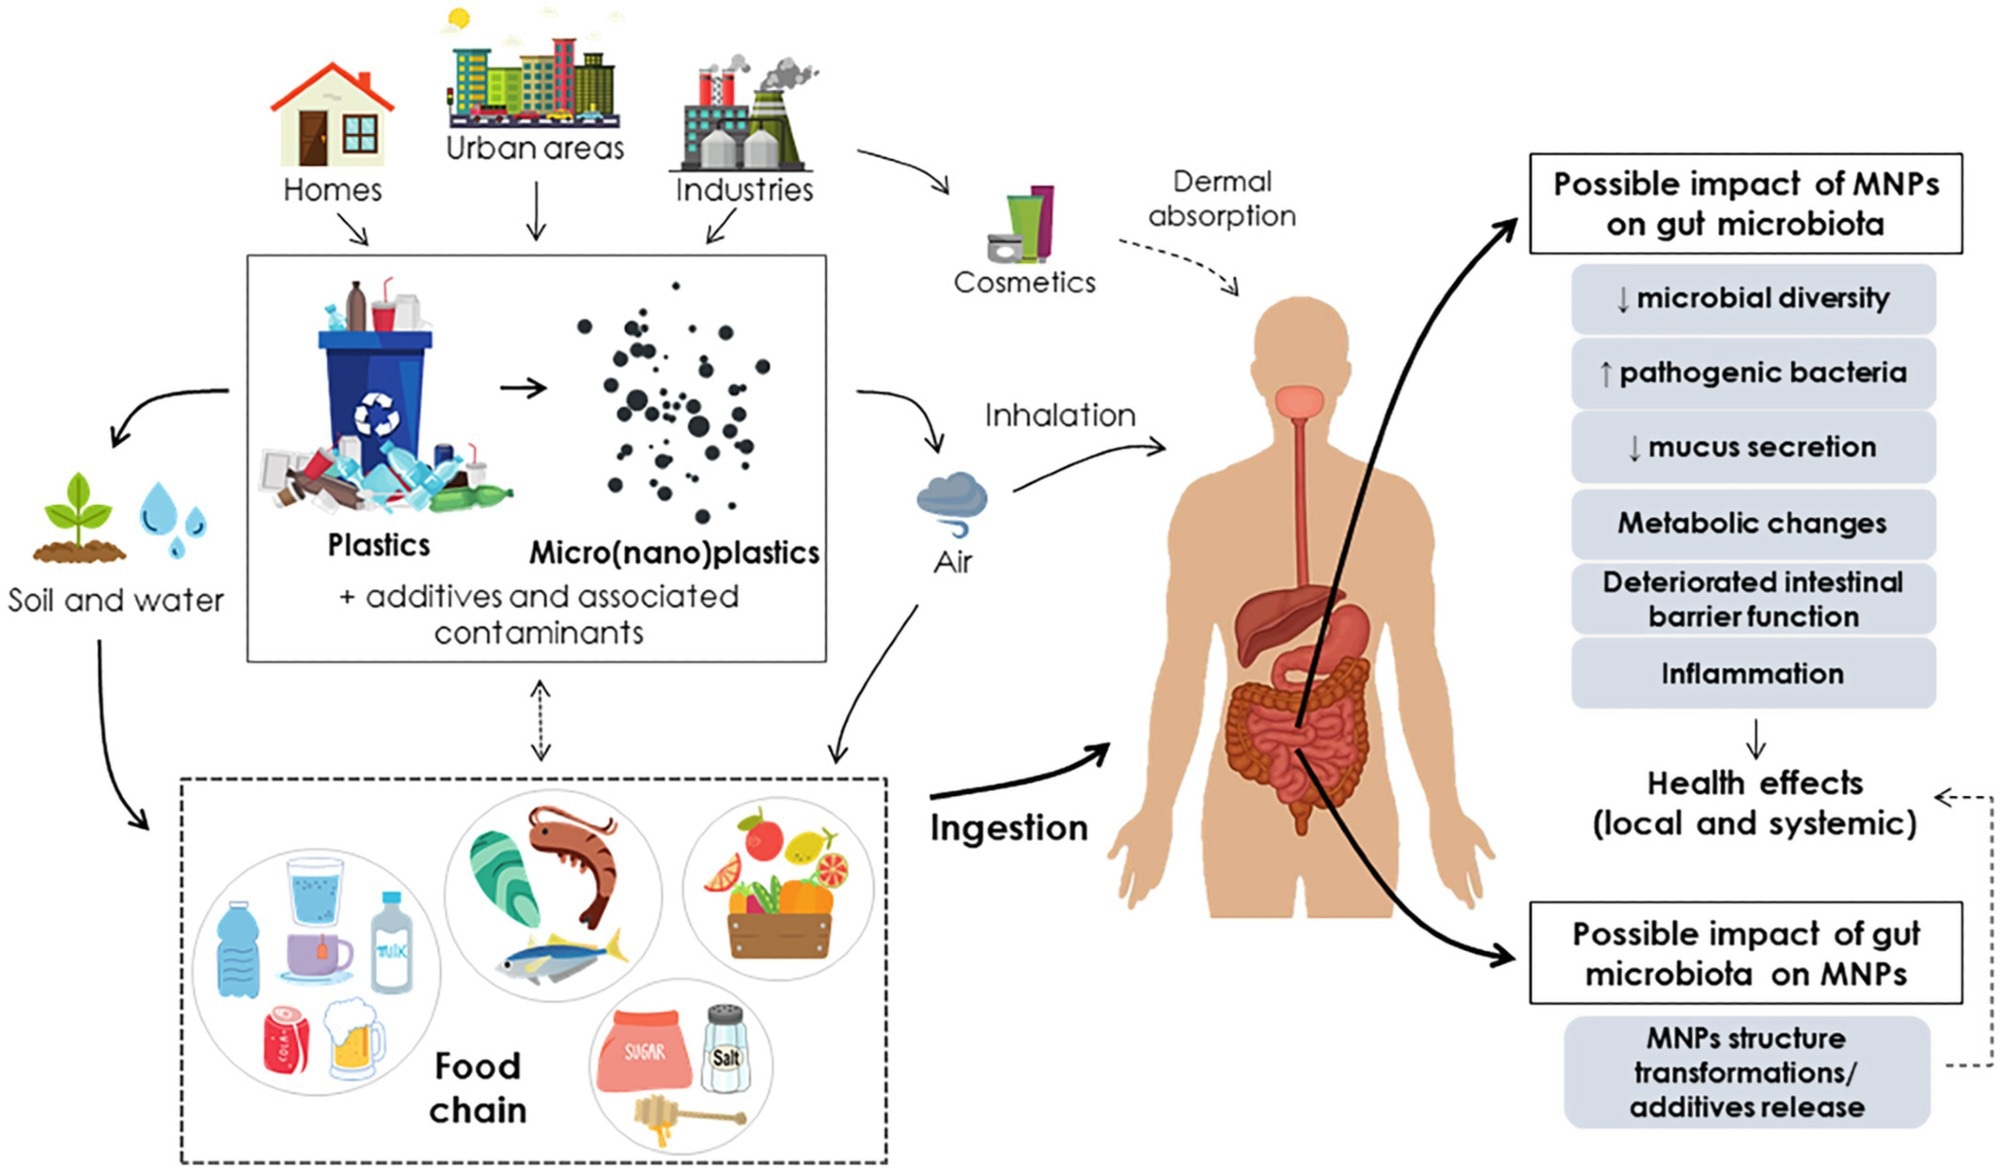 Routes of micro(nano)plastic exposure to humans and their impact on the gut microbiota. Designed using elements by ©Canva via Canva.com (access date: May 2022, version used Canva 2.0)